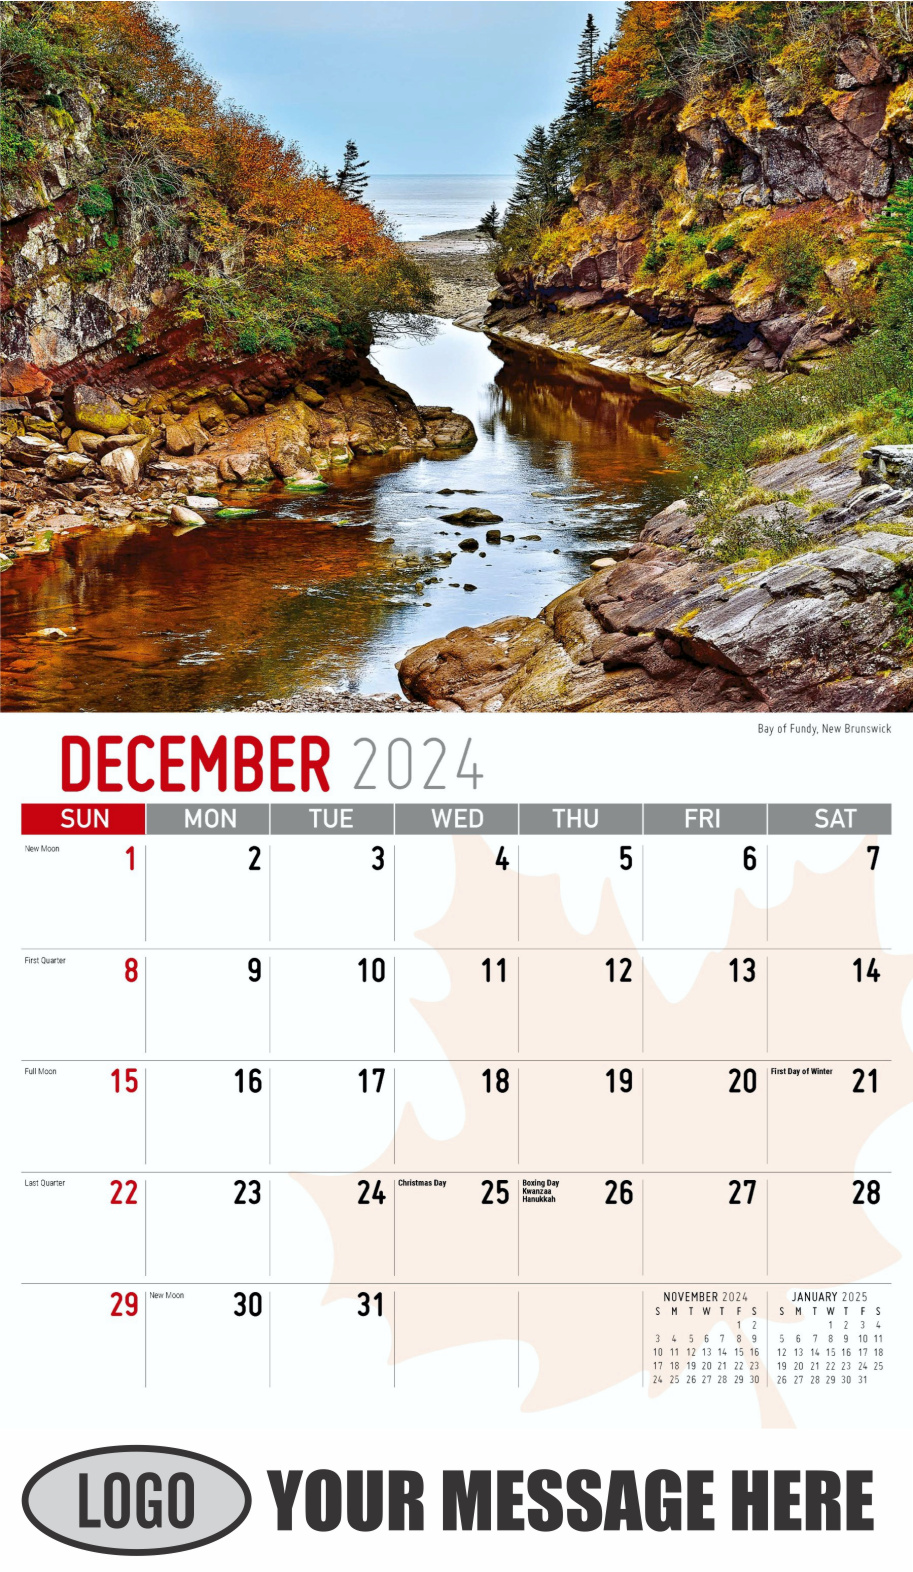 Scenes of Canada 2024 Business Promotion Wall Calendar - December